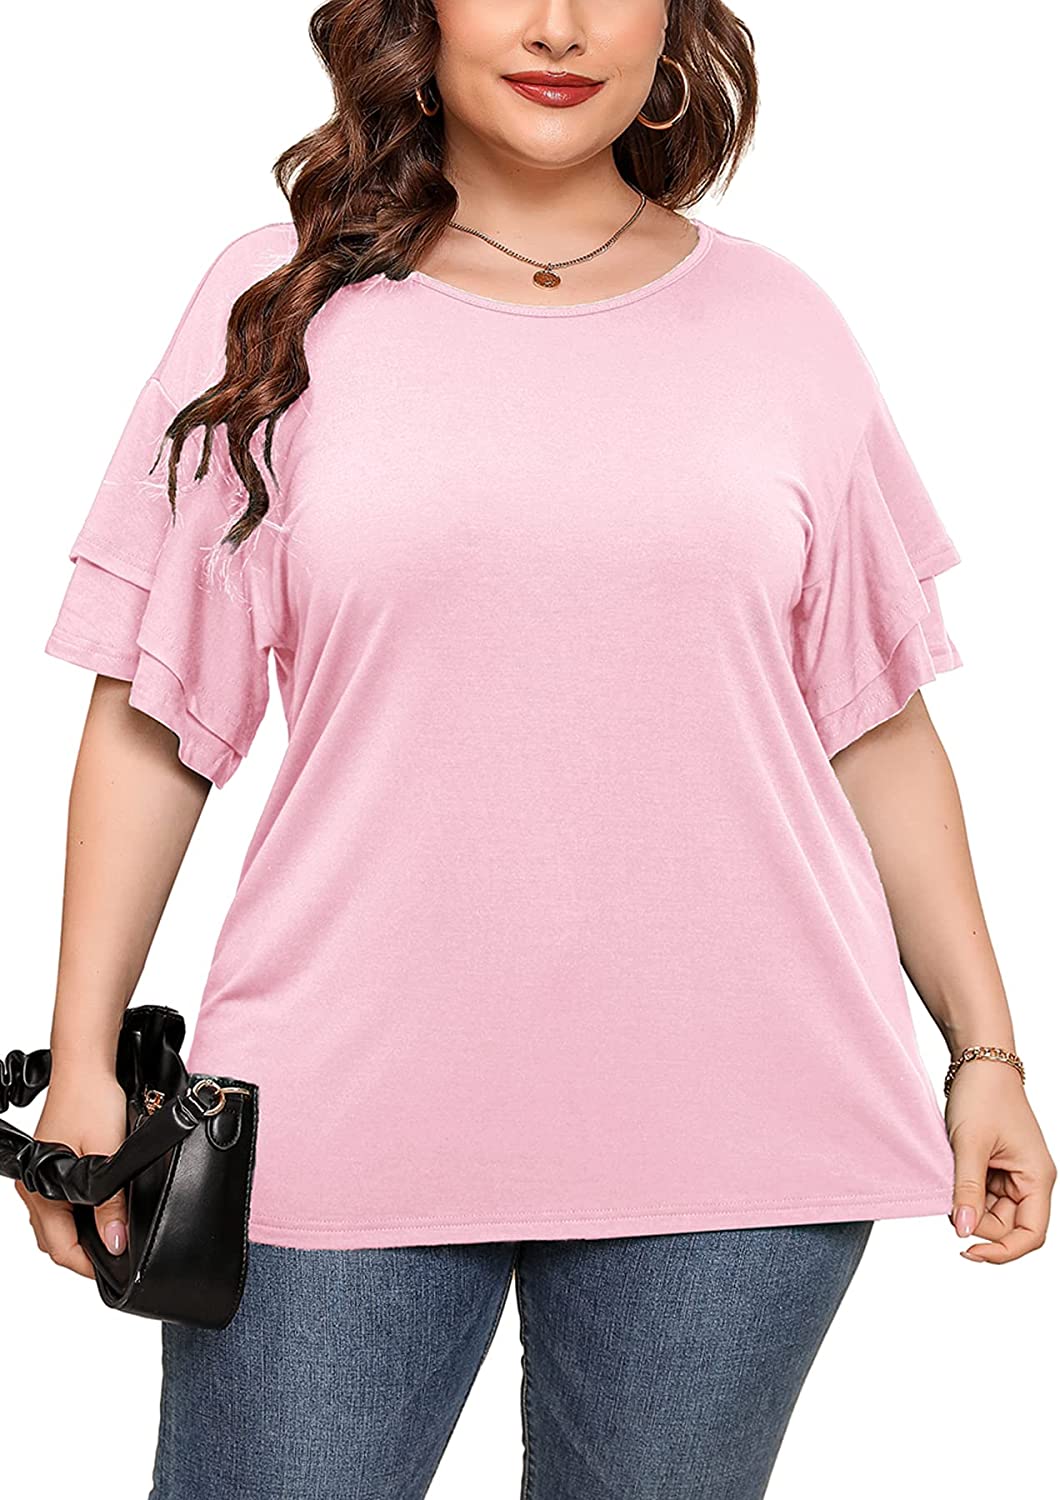 AusLook Plus Size Tunic for Women Double Ruffle Short Sleeve Clothes Loose  Fit Clothing Flowy Shirts Summer Tops